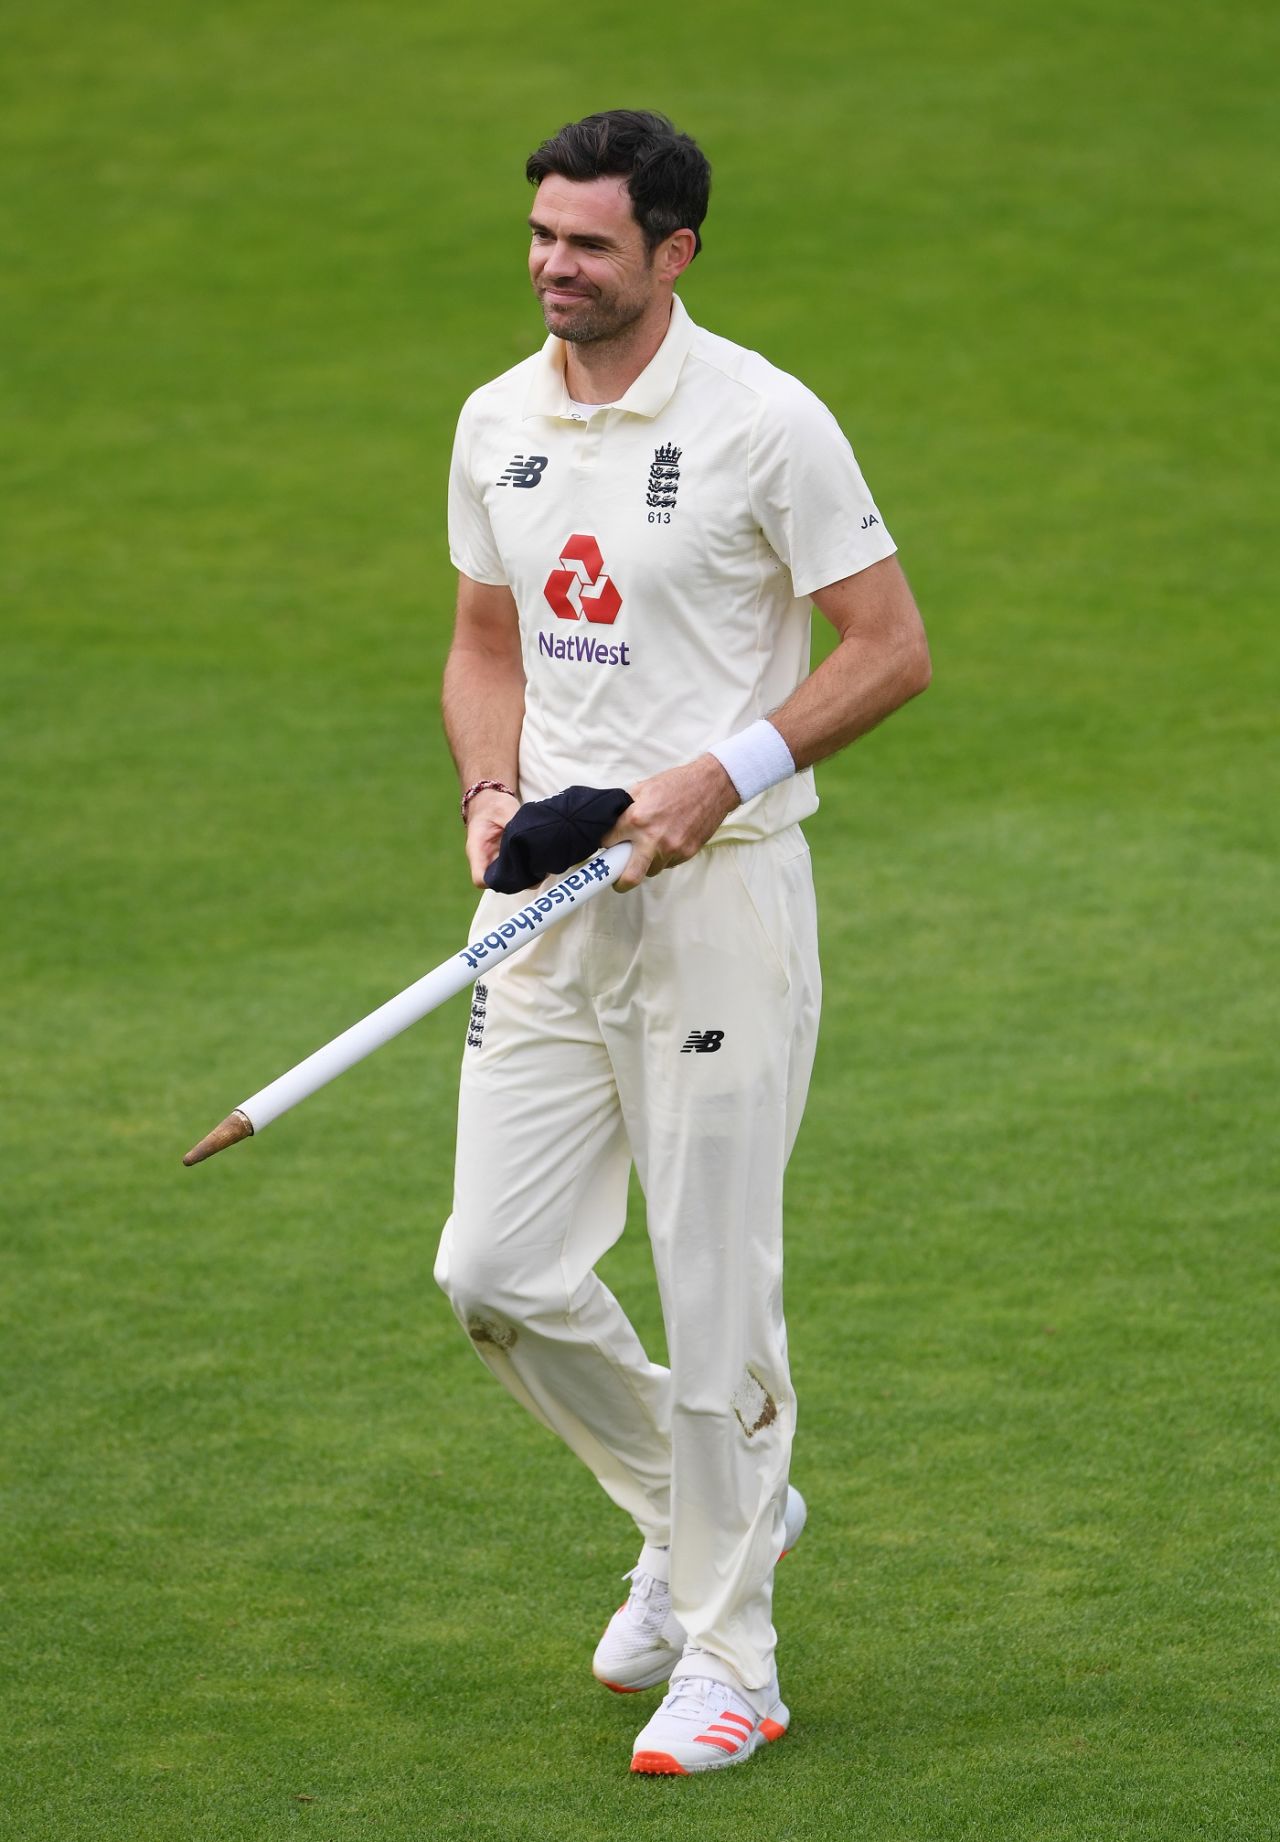 You take your 600th wicket, you grab a stump as a souvenir - as James Anderson does, England v Pakistan, 3rd Test, Southampton, 5th day, August 25, 2020